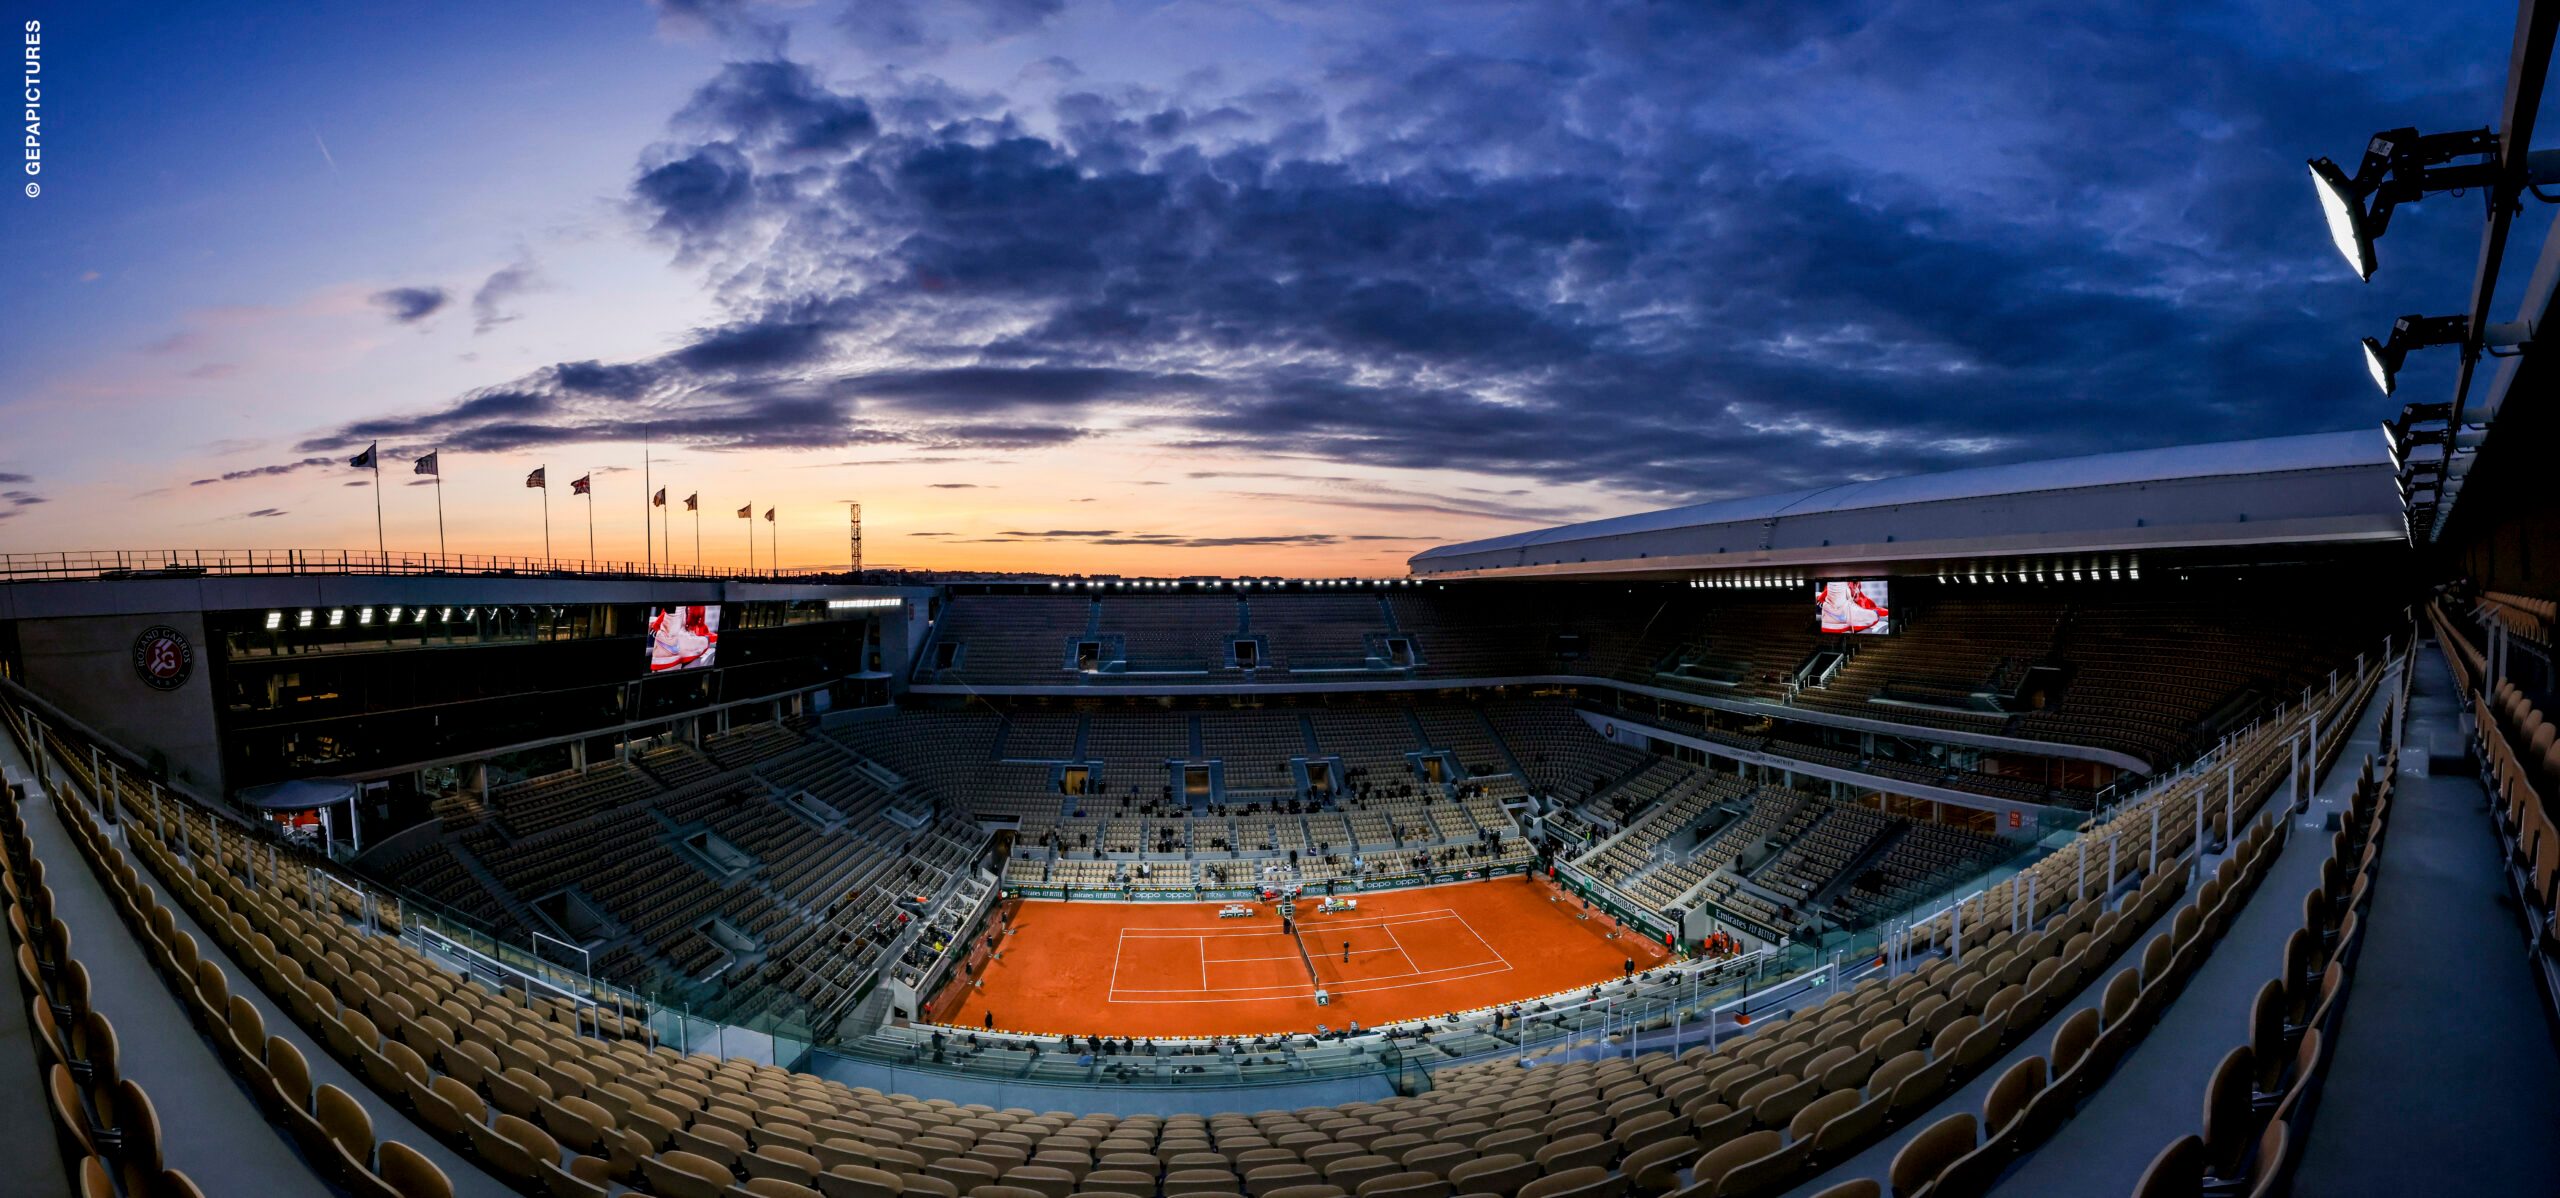 PARIS,FRANCE,28.SEP.20 - TENNIS - ATP World Tour, French Open, Roland Garros, Grand Slam. Image shows an overview of the Court Philippe Chatrier.